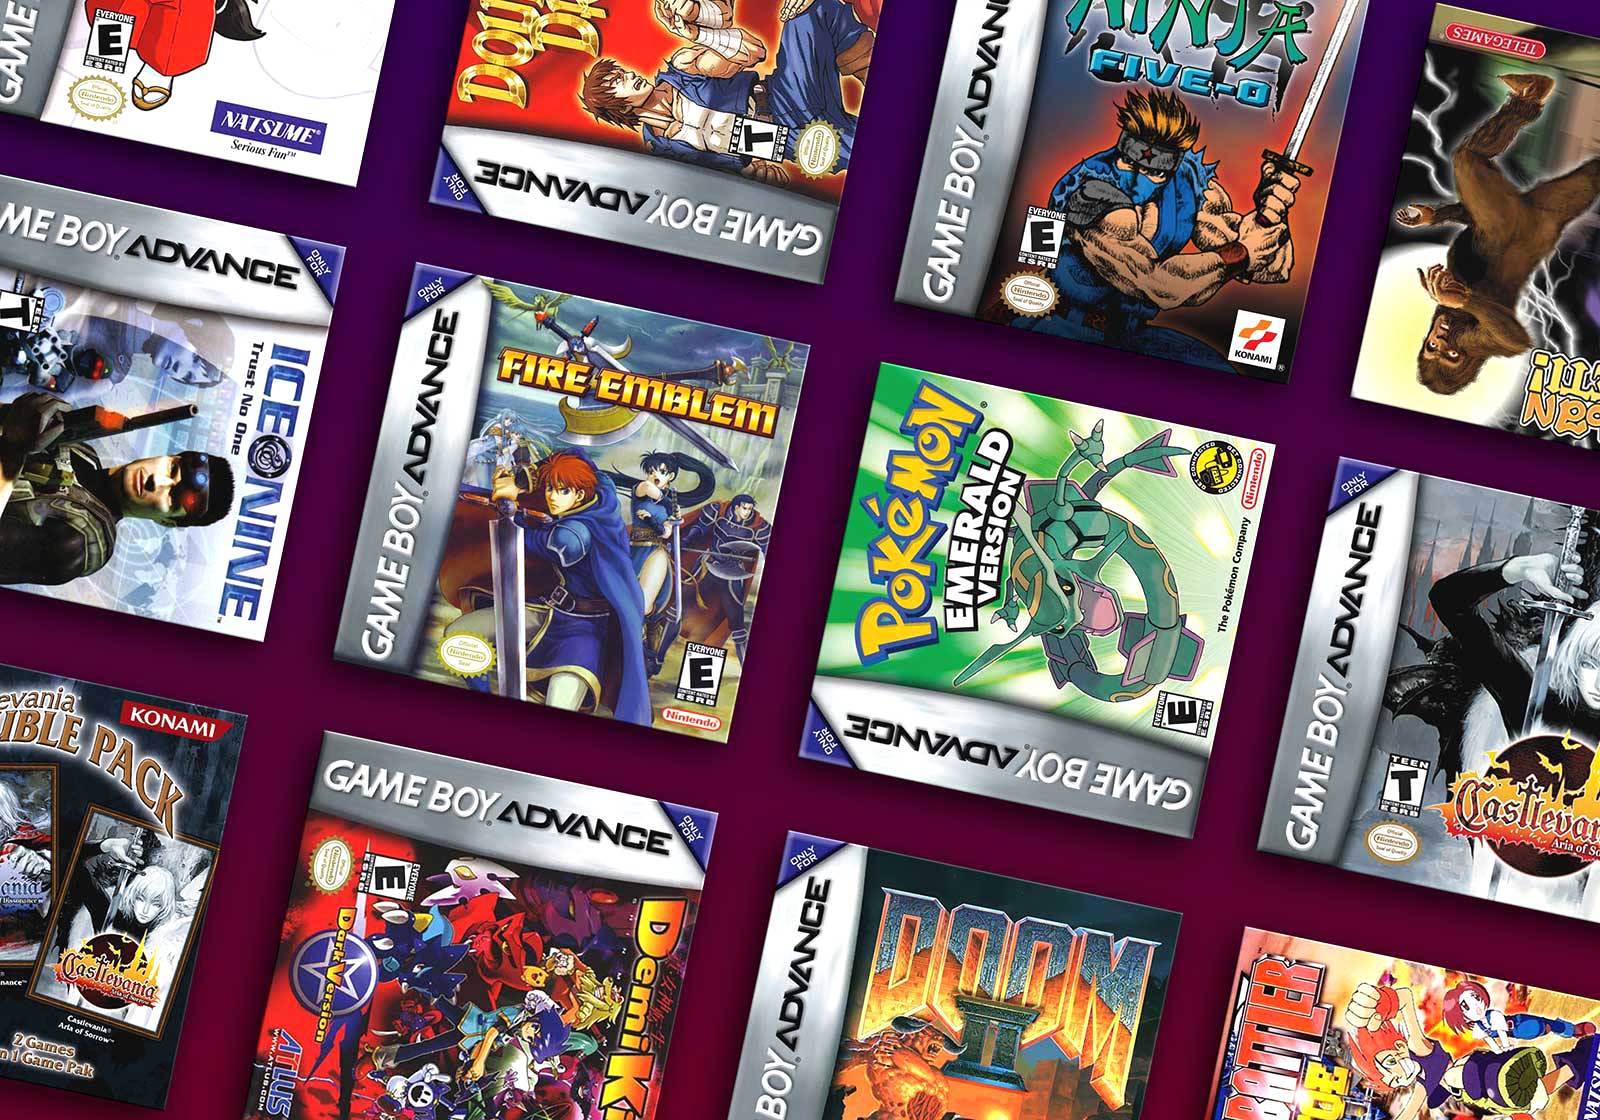 snes games on gba